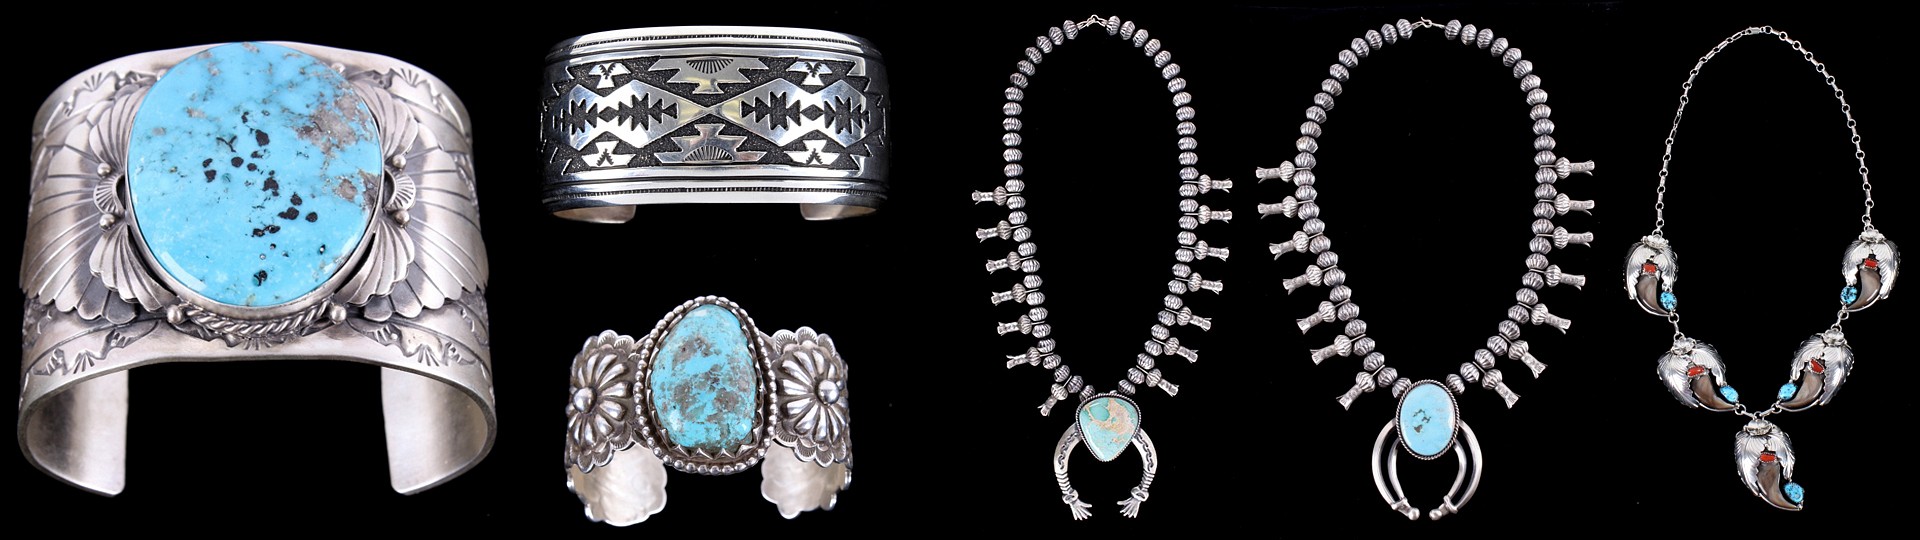 American Indian Weapons, Jewelry, Rugs & Western September Sale by North American Auction Company